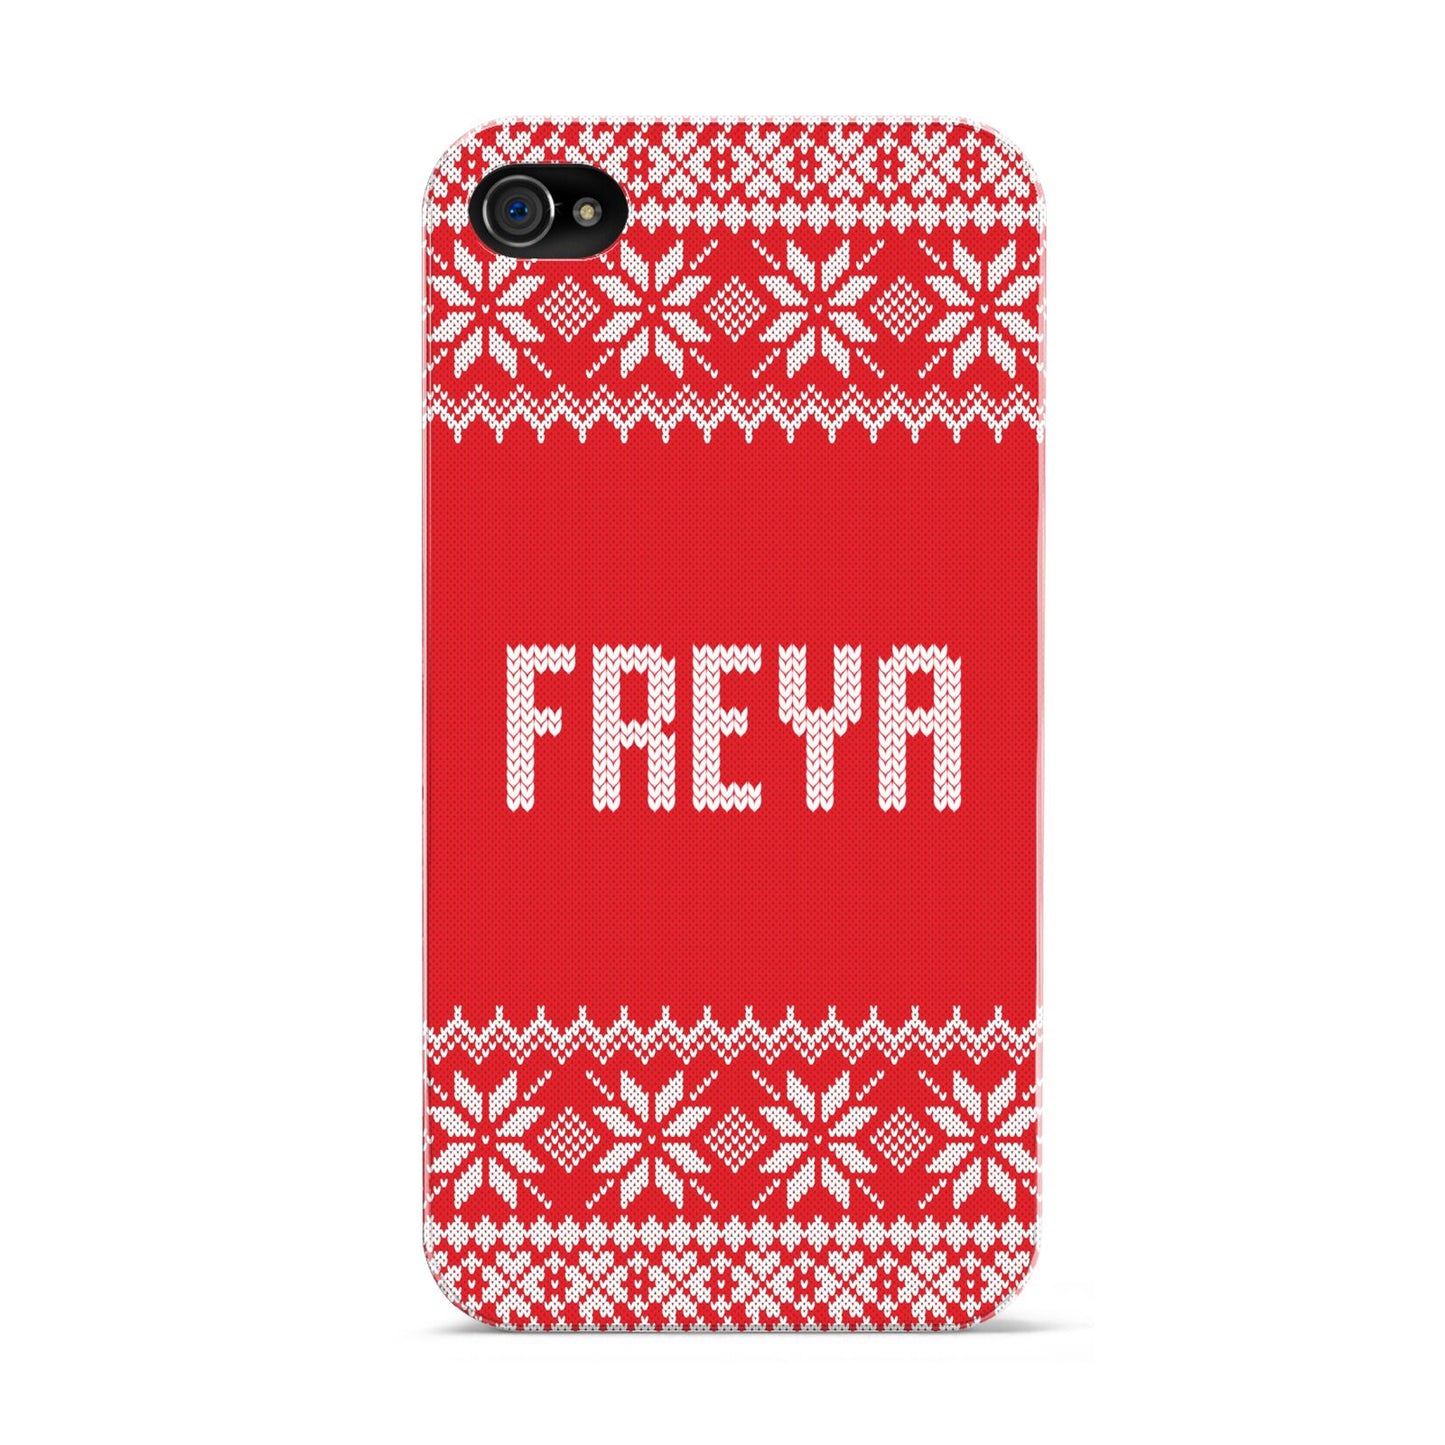 Christmas Jumper Apple iPhone 4s Case